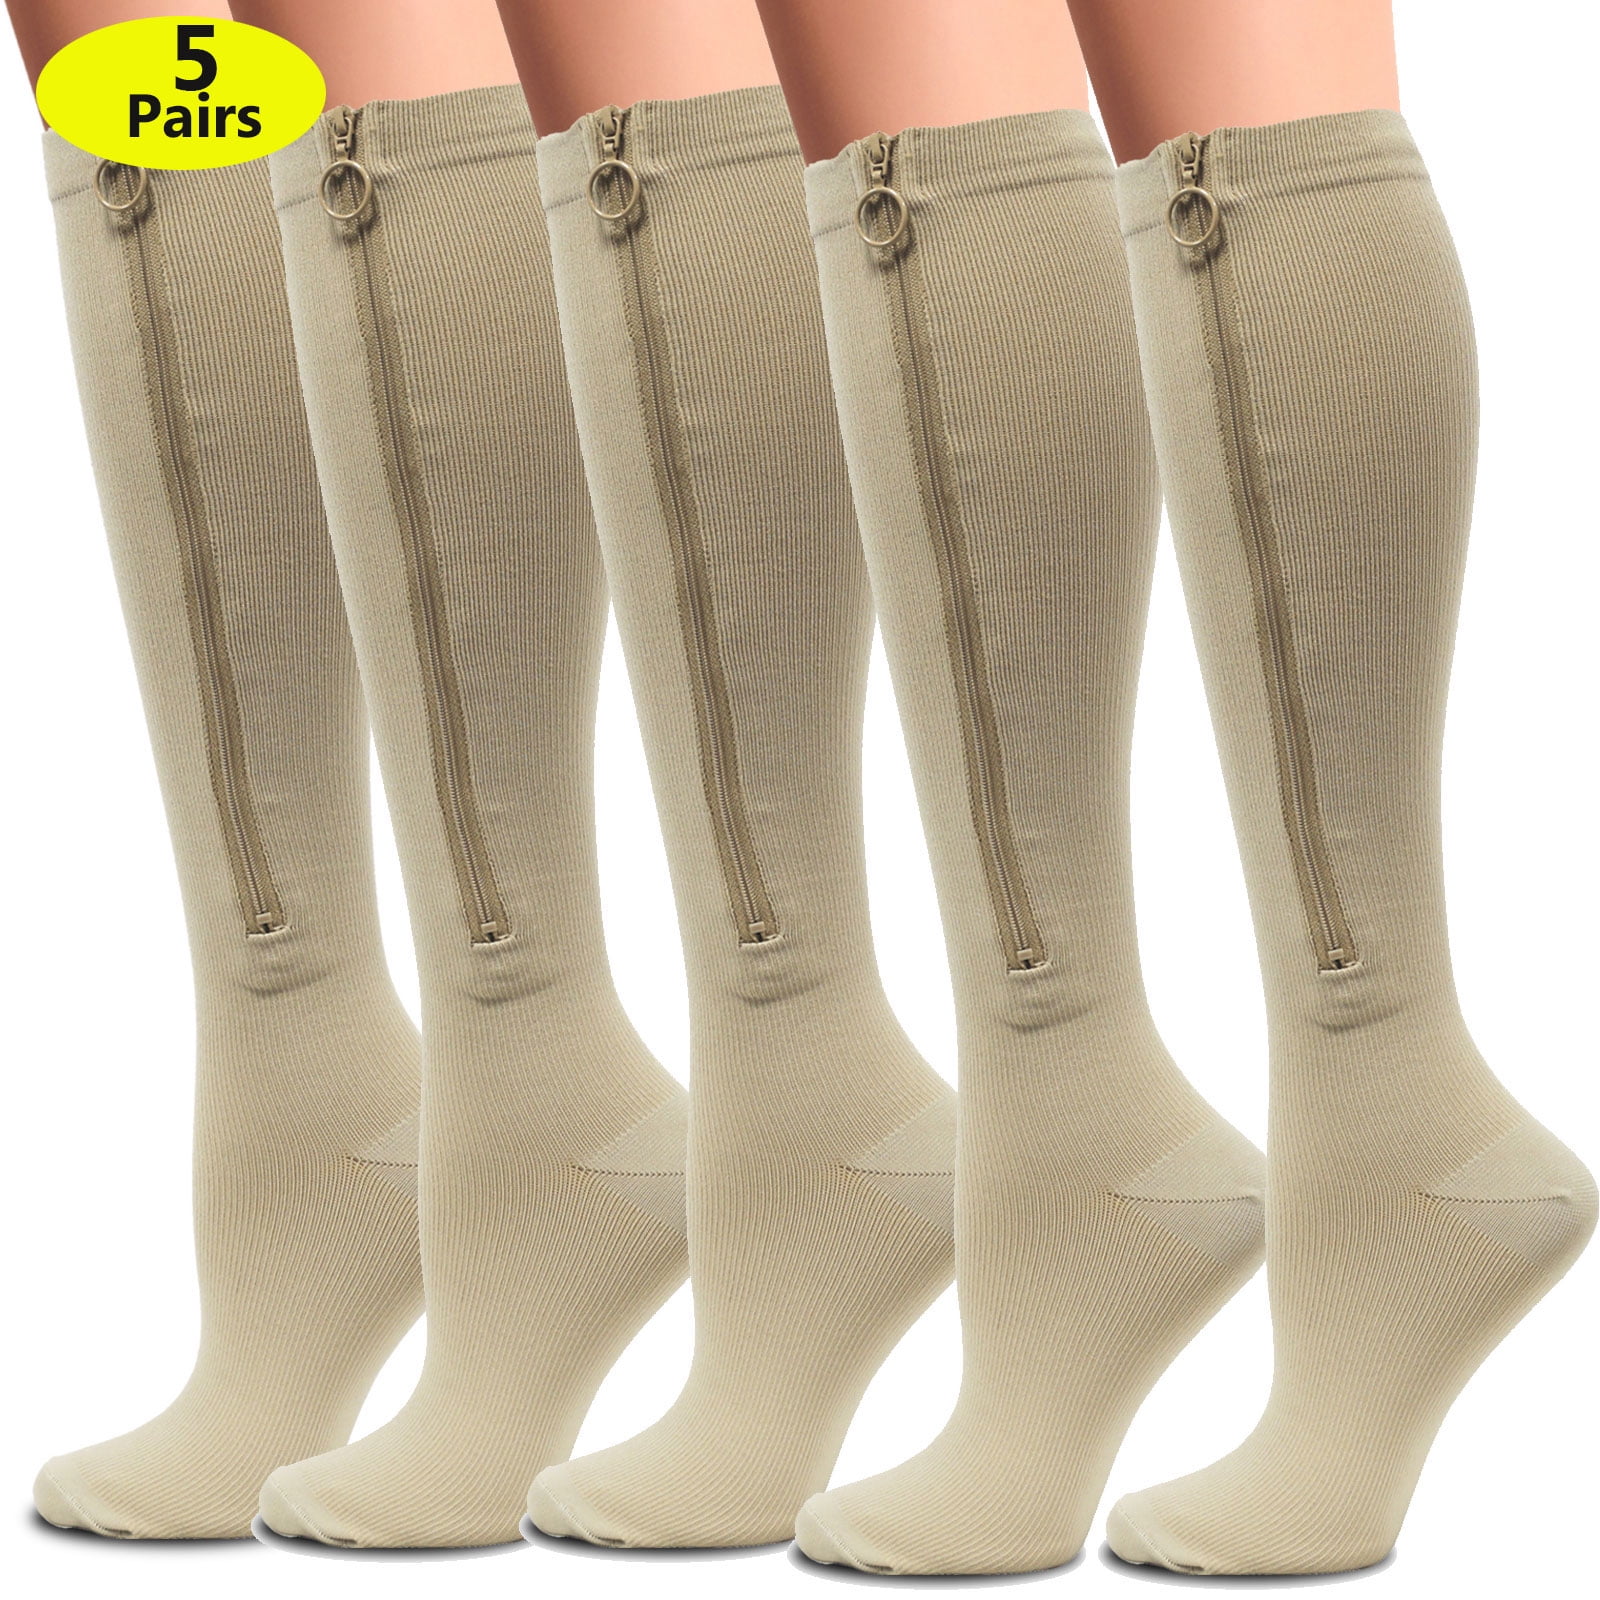 5XL Opaque Mojo Compression Socks Knee-Hi - Firm Medical Support Hose -  Closed Toe 20-30 mmHg Graduated Compression Stockings (Size: XXXXXL Beige)